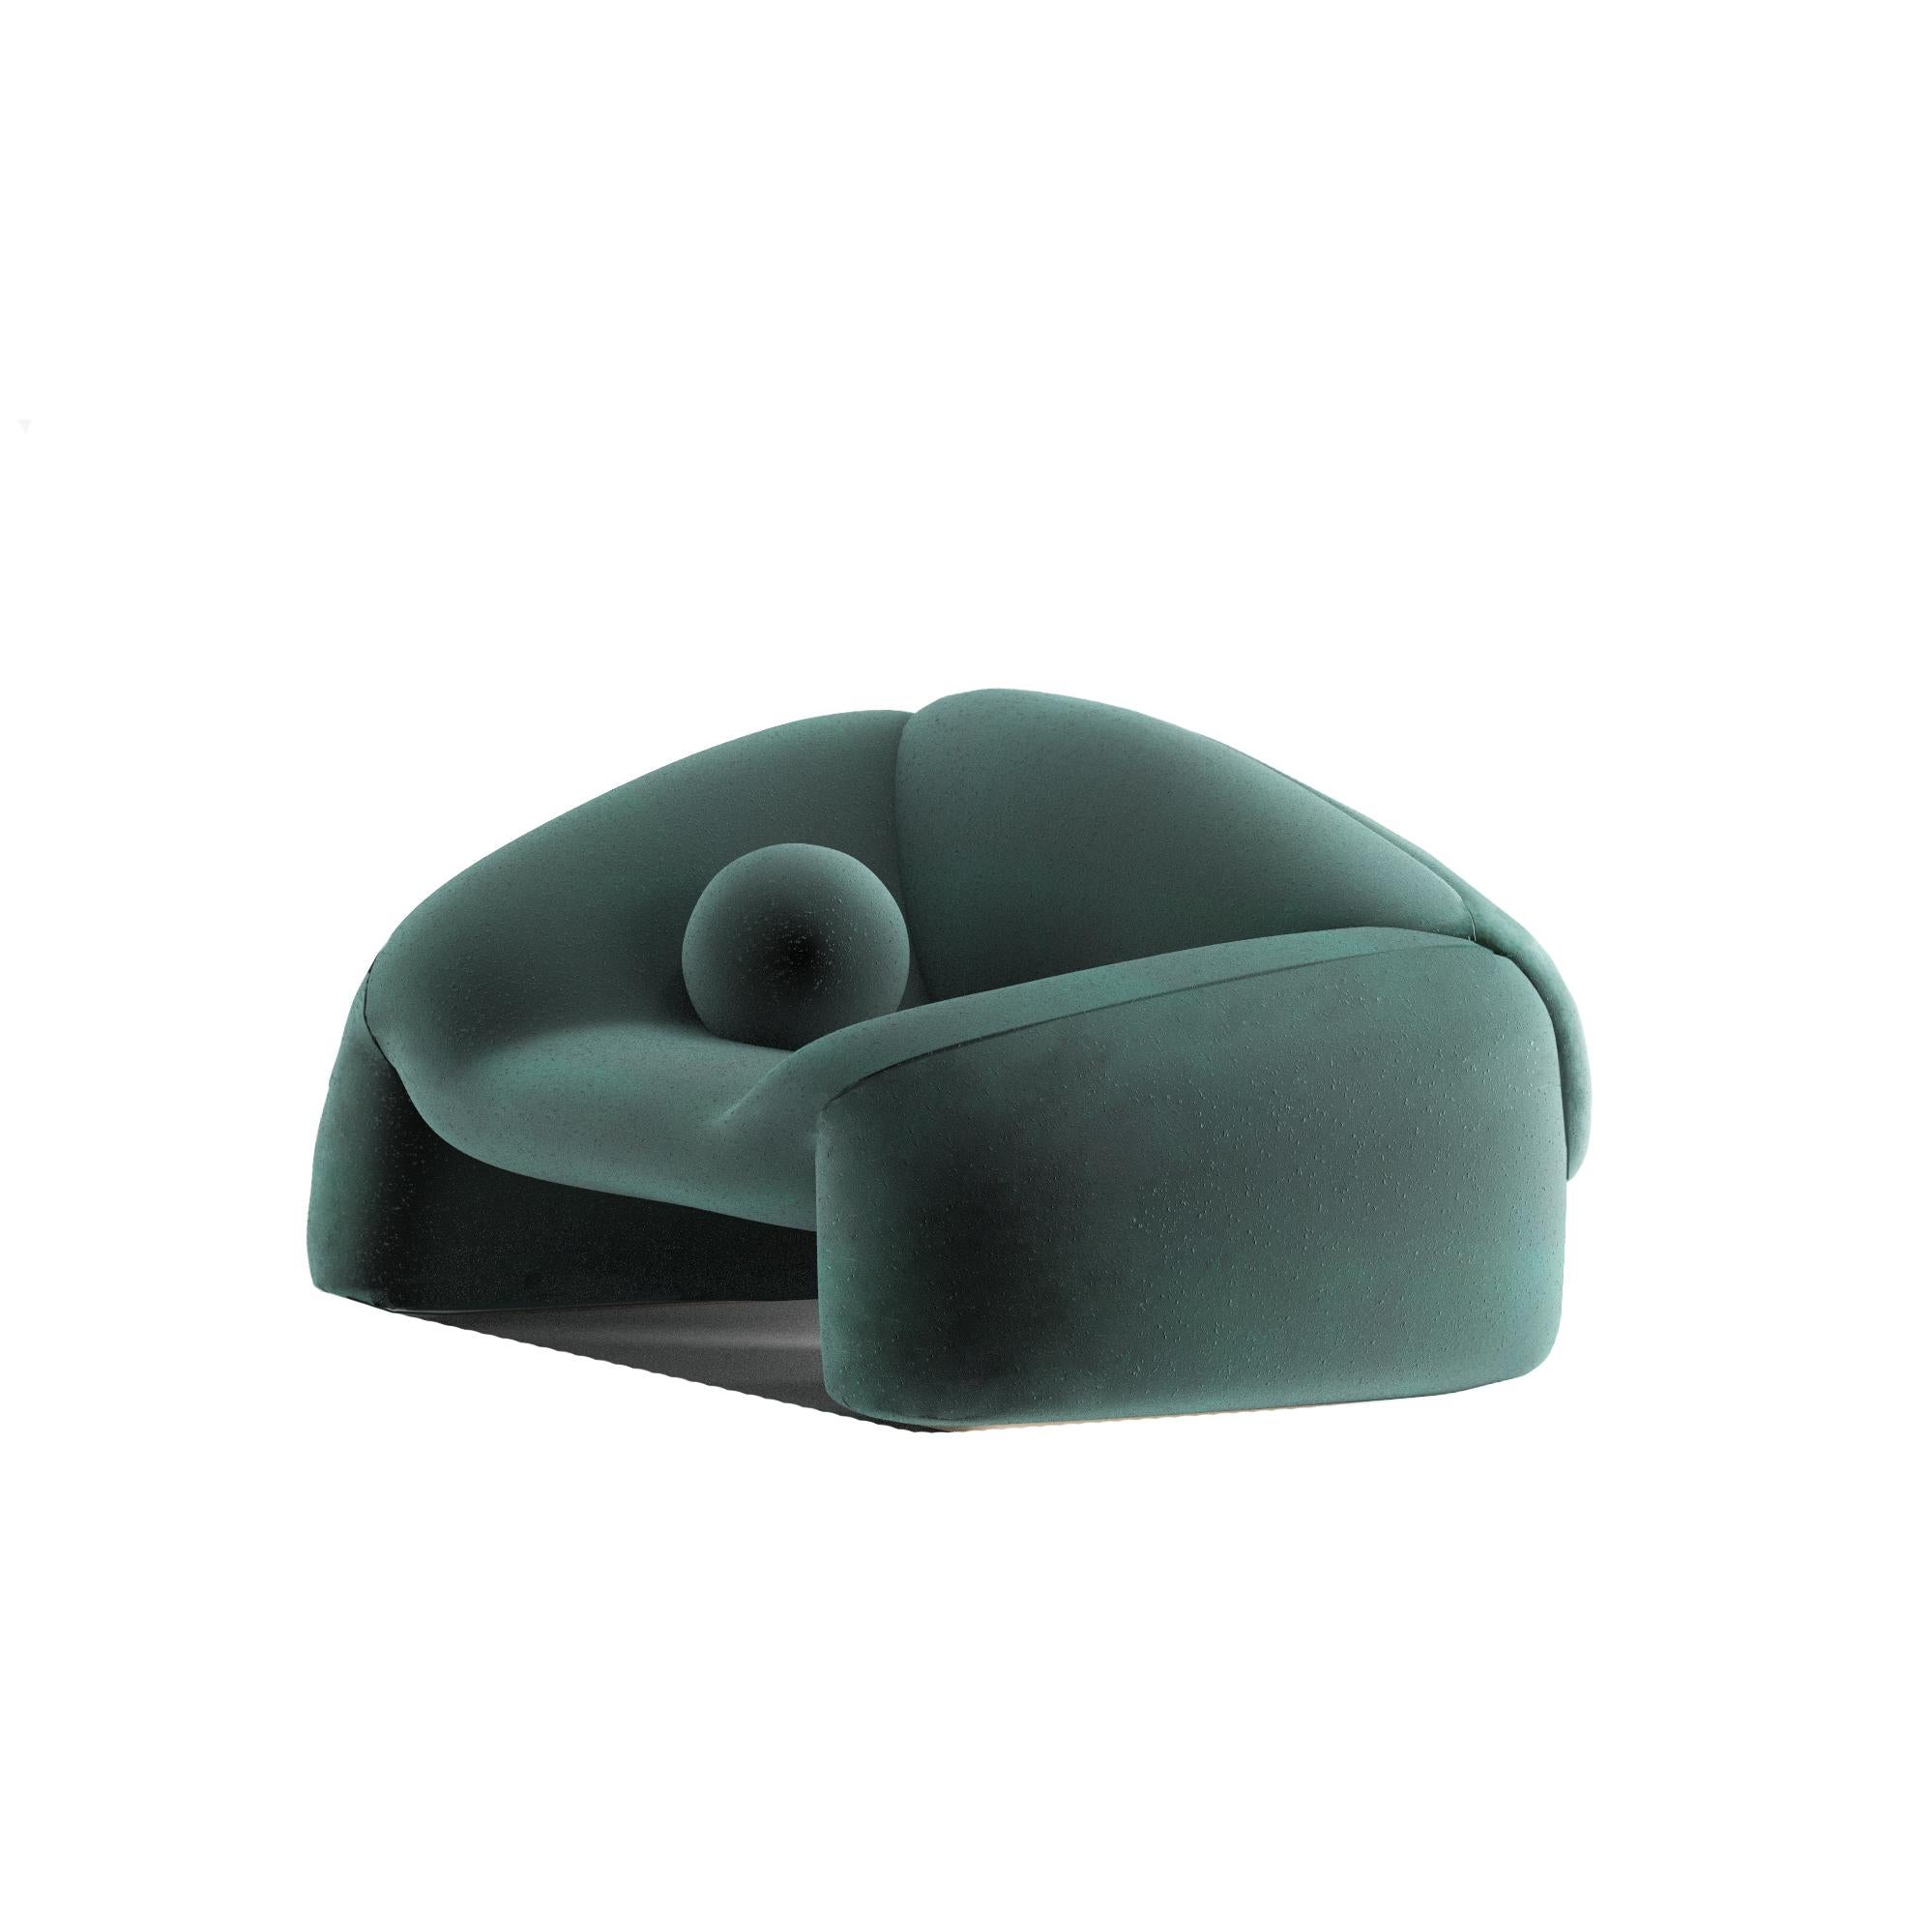 Jell Armchair in Dark Green Fabric by Alter Ego Studio

Dimensions
W 155 cm 
D 120 cm
H  80 cm

Product features

Product options:

Upholstery:
Available in all Alter Ego leathers and fabrics.
Available in client’s own Material.
